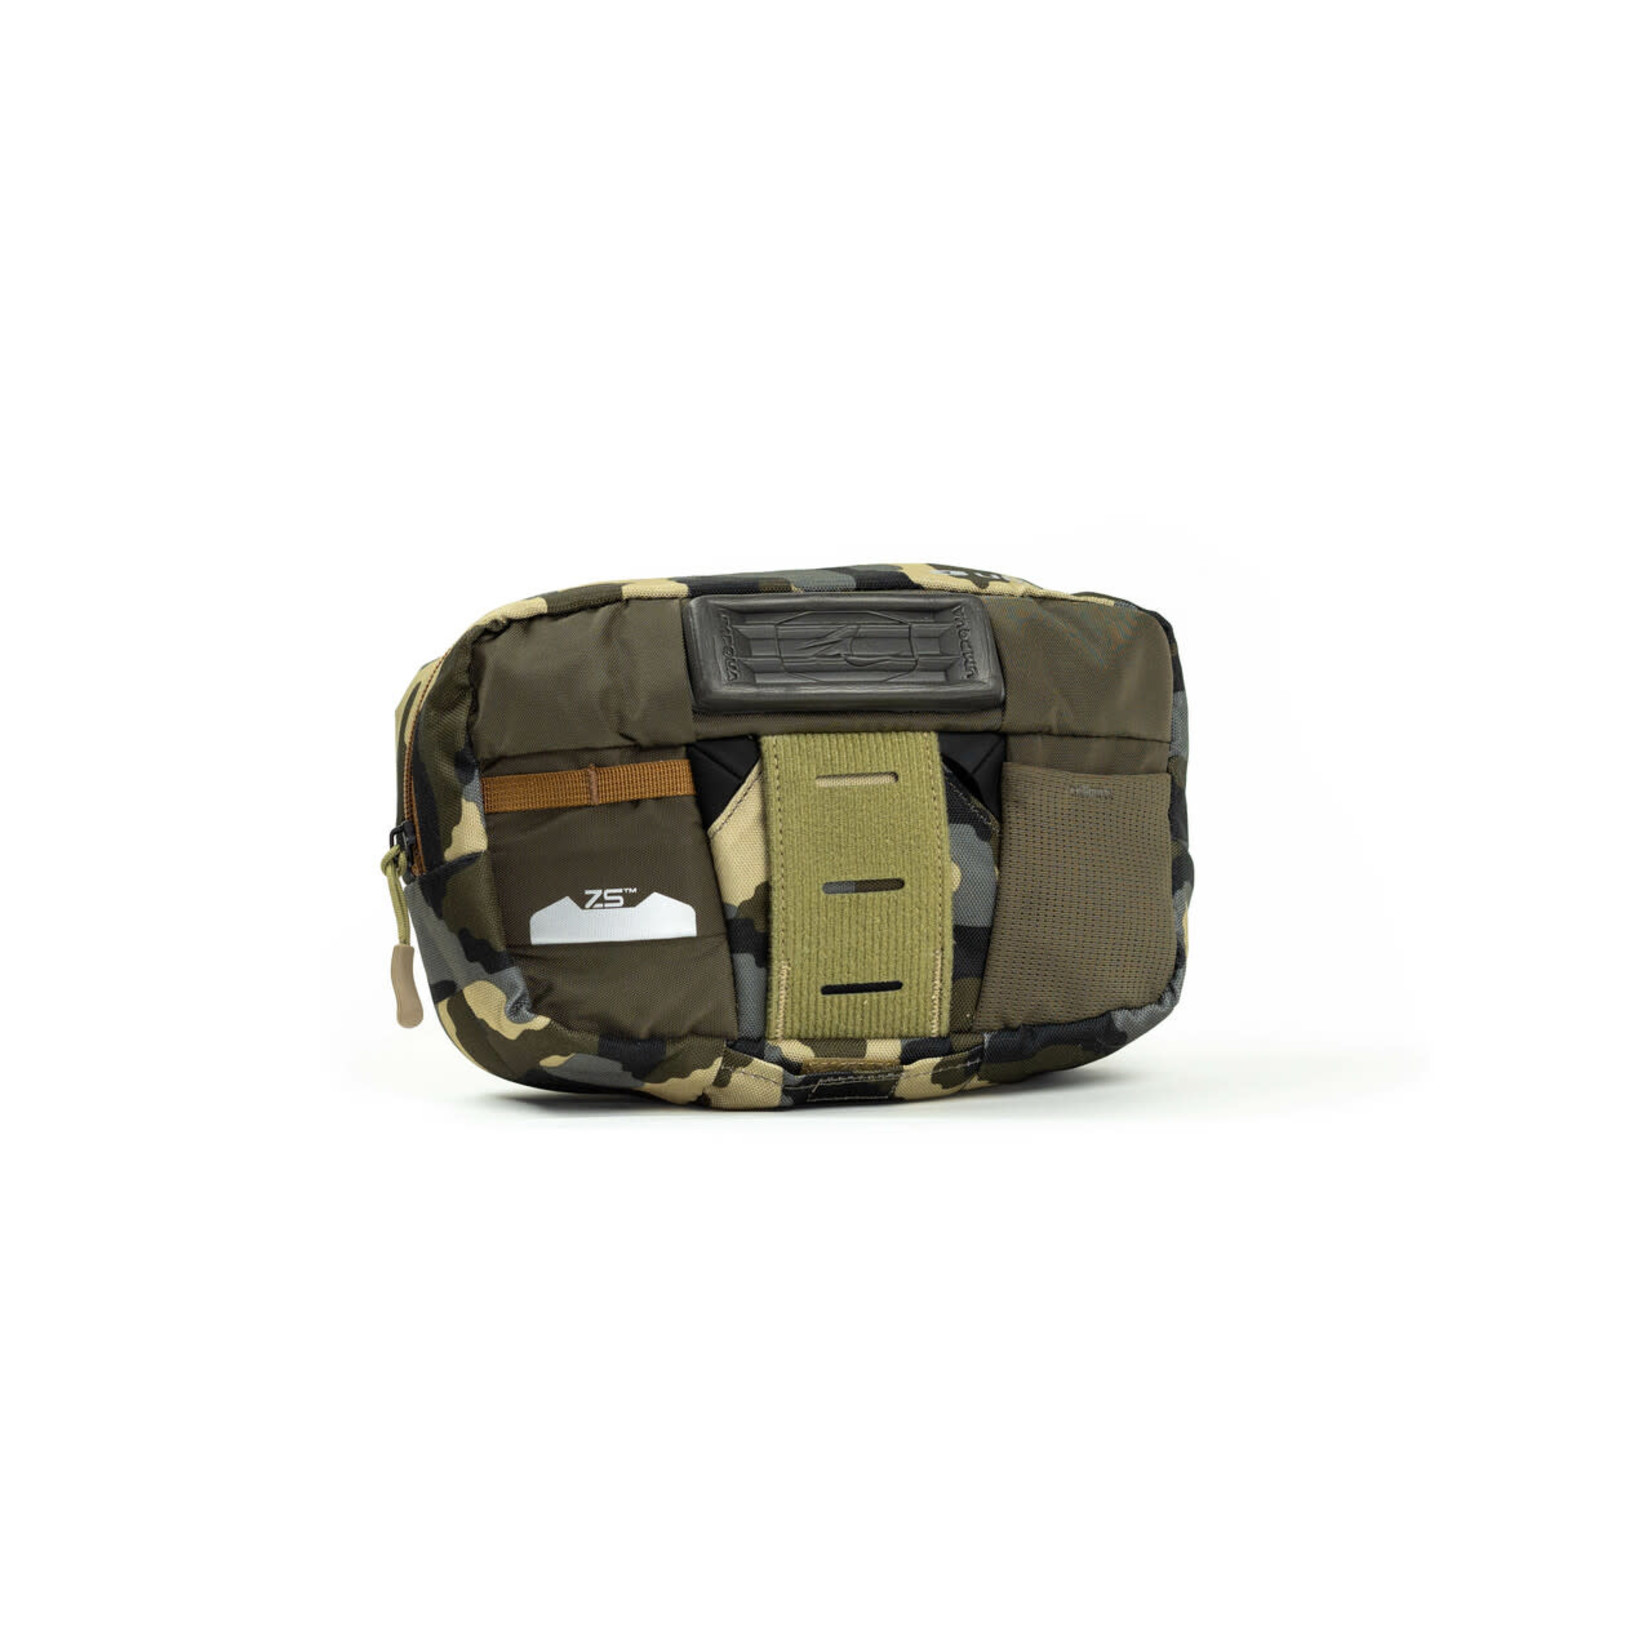 ZS2 WADER CHEST CAMO - Black Dog Outdoor Sports